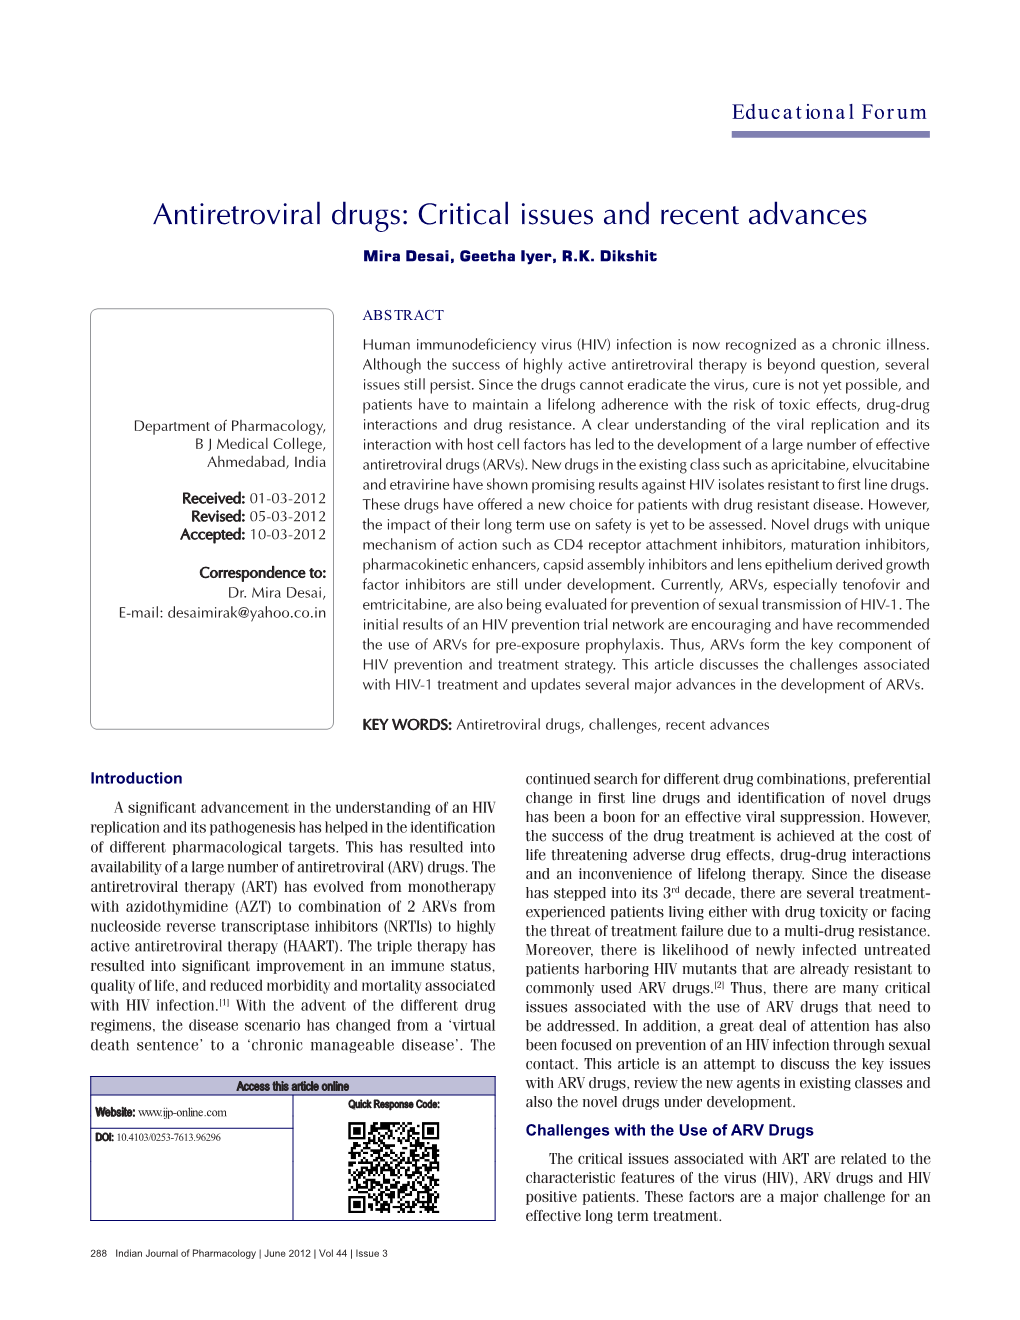 Antiretroviral Drugs: Critical Issues and Recent Advances